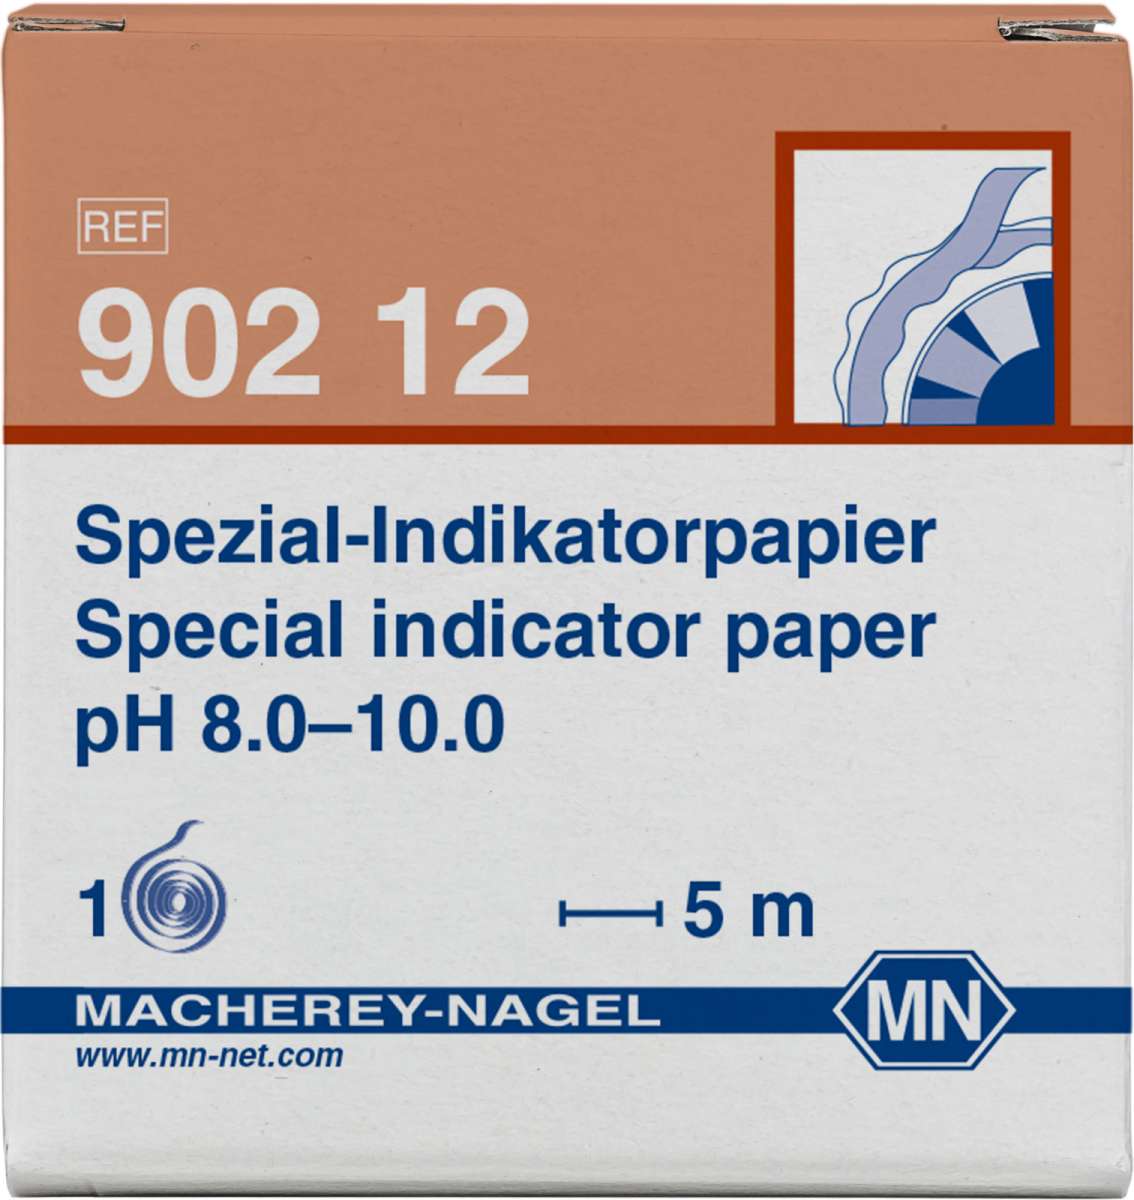 Refill pack for Special indicator paper pH 8.0 to 10.0 (3 reels of 5m length and 7mm width)